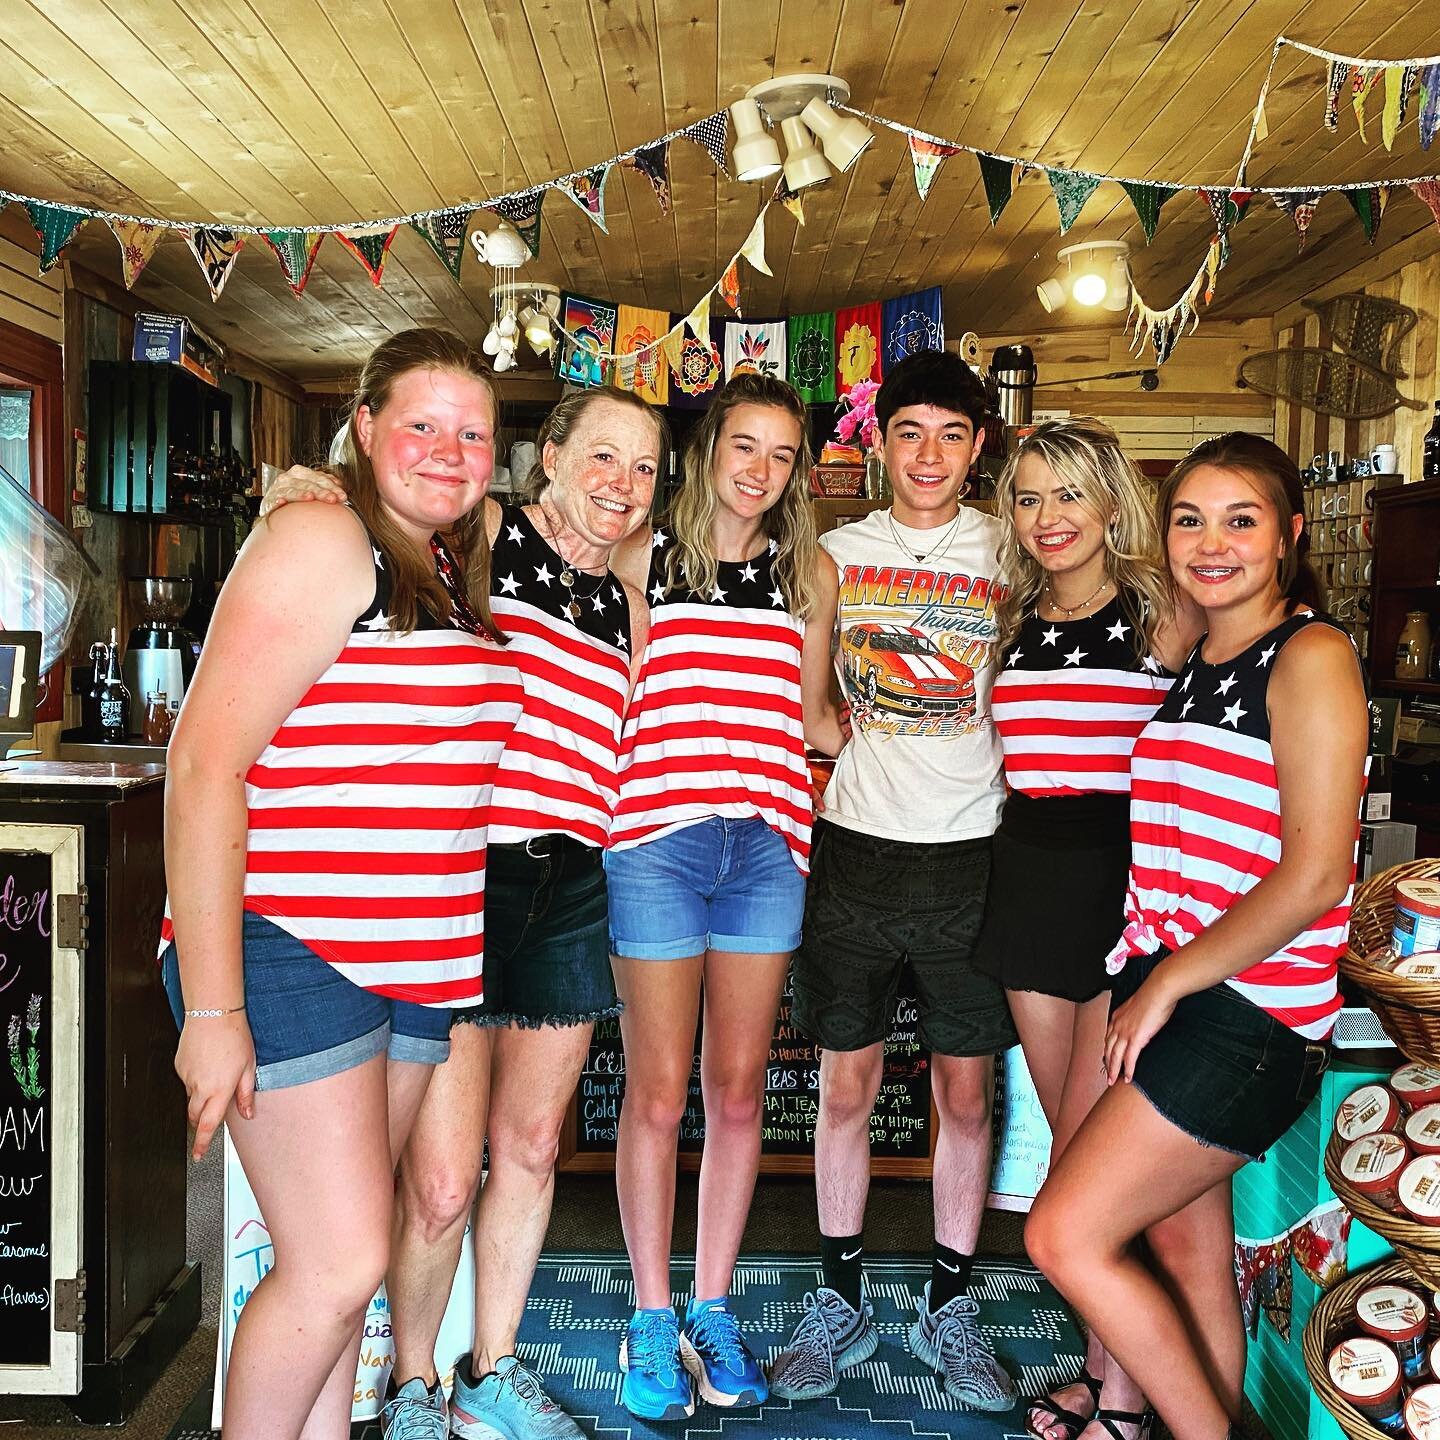 Happy 4th from the Brew Crew @ Coffee on the Fly! We are grateful for each and every one of our customers!!! #stayelevated #brewcrew #coffeeislove #staffylove